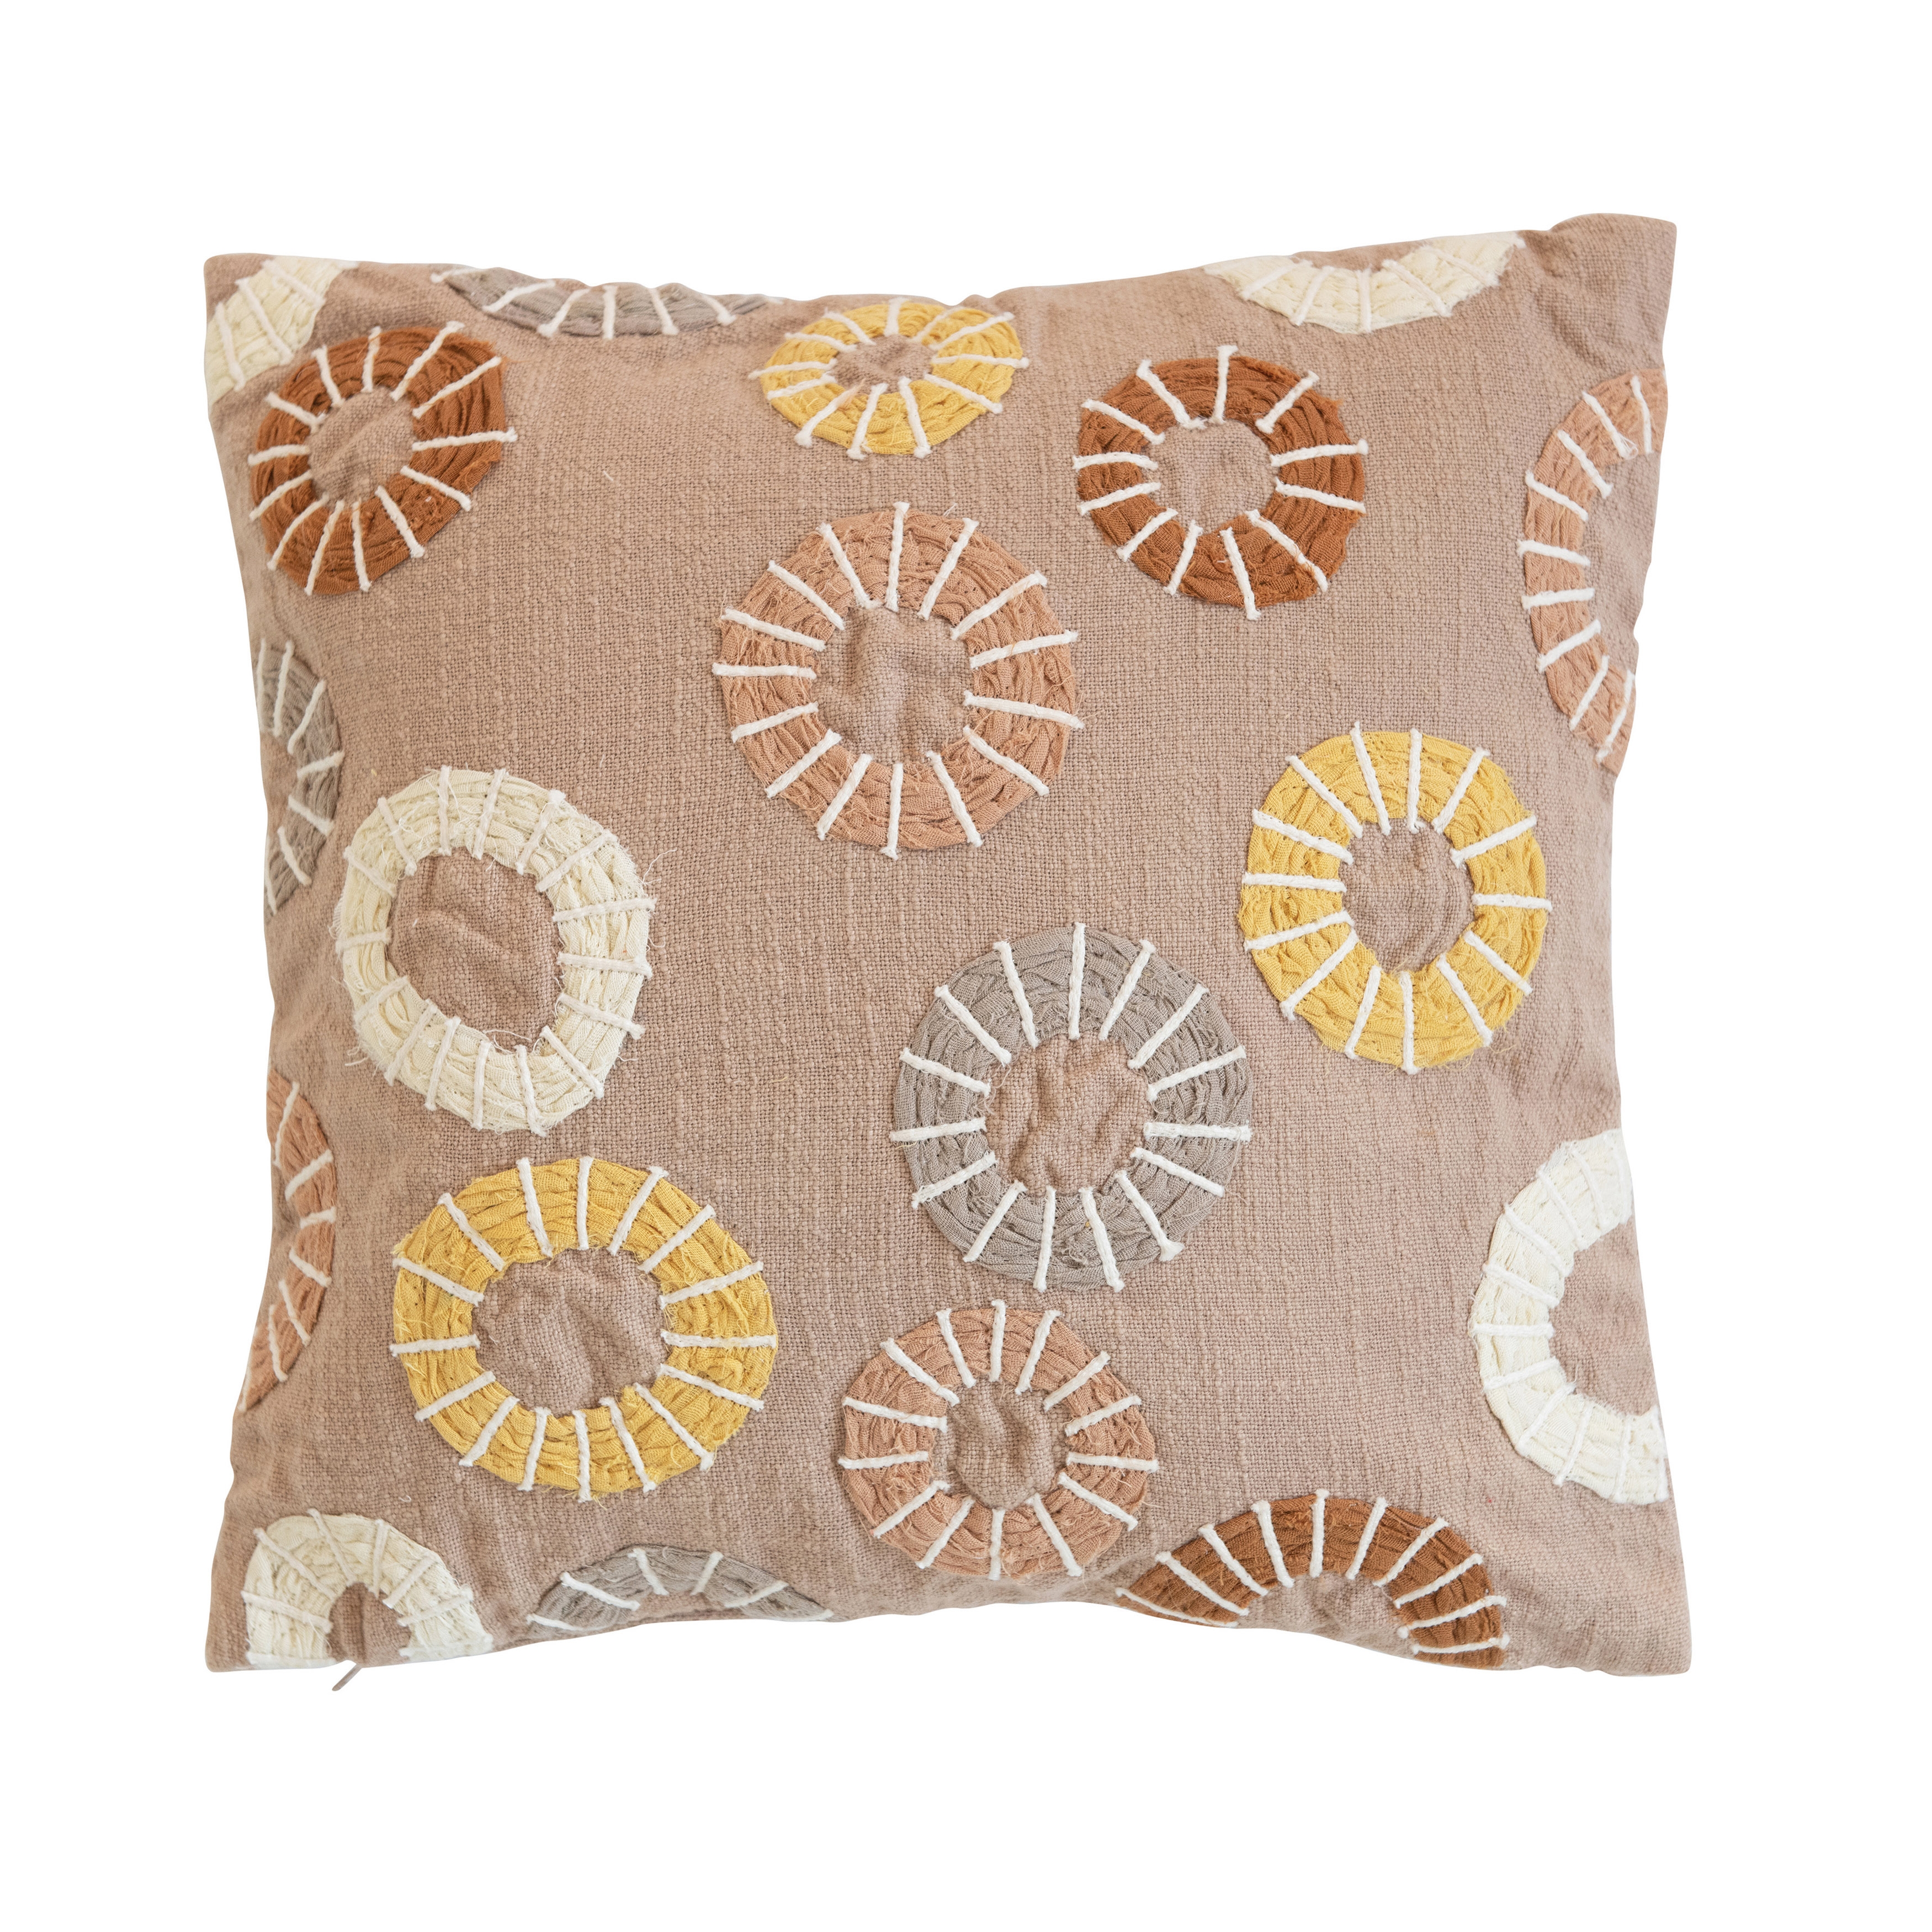 Cotton Embroidered Pillow with Dots, Multi Color - Image 0